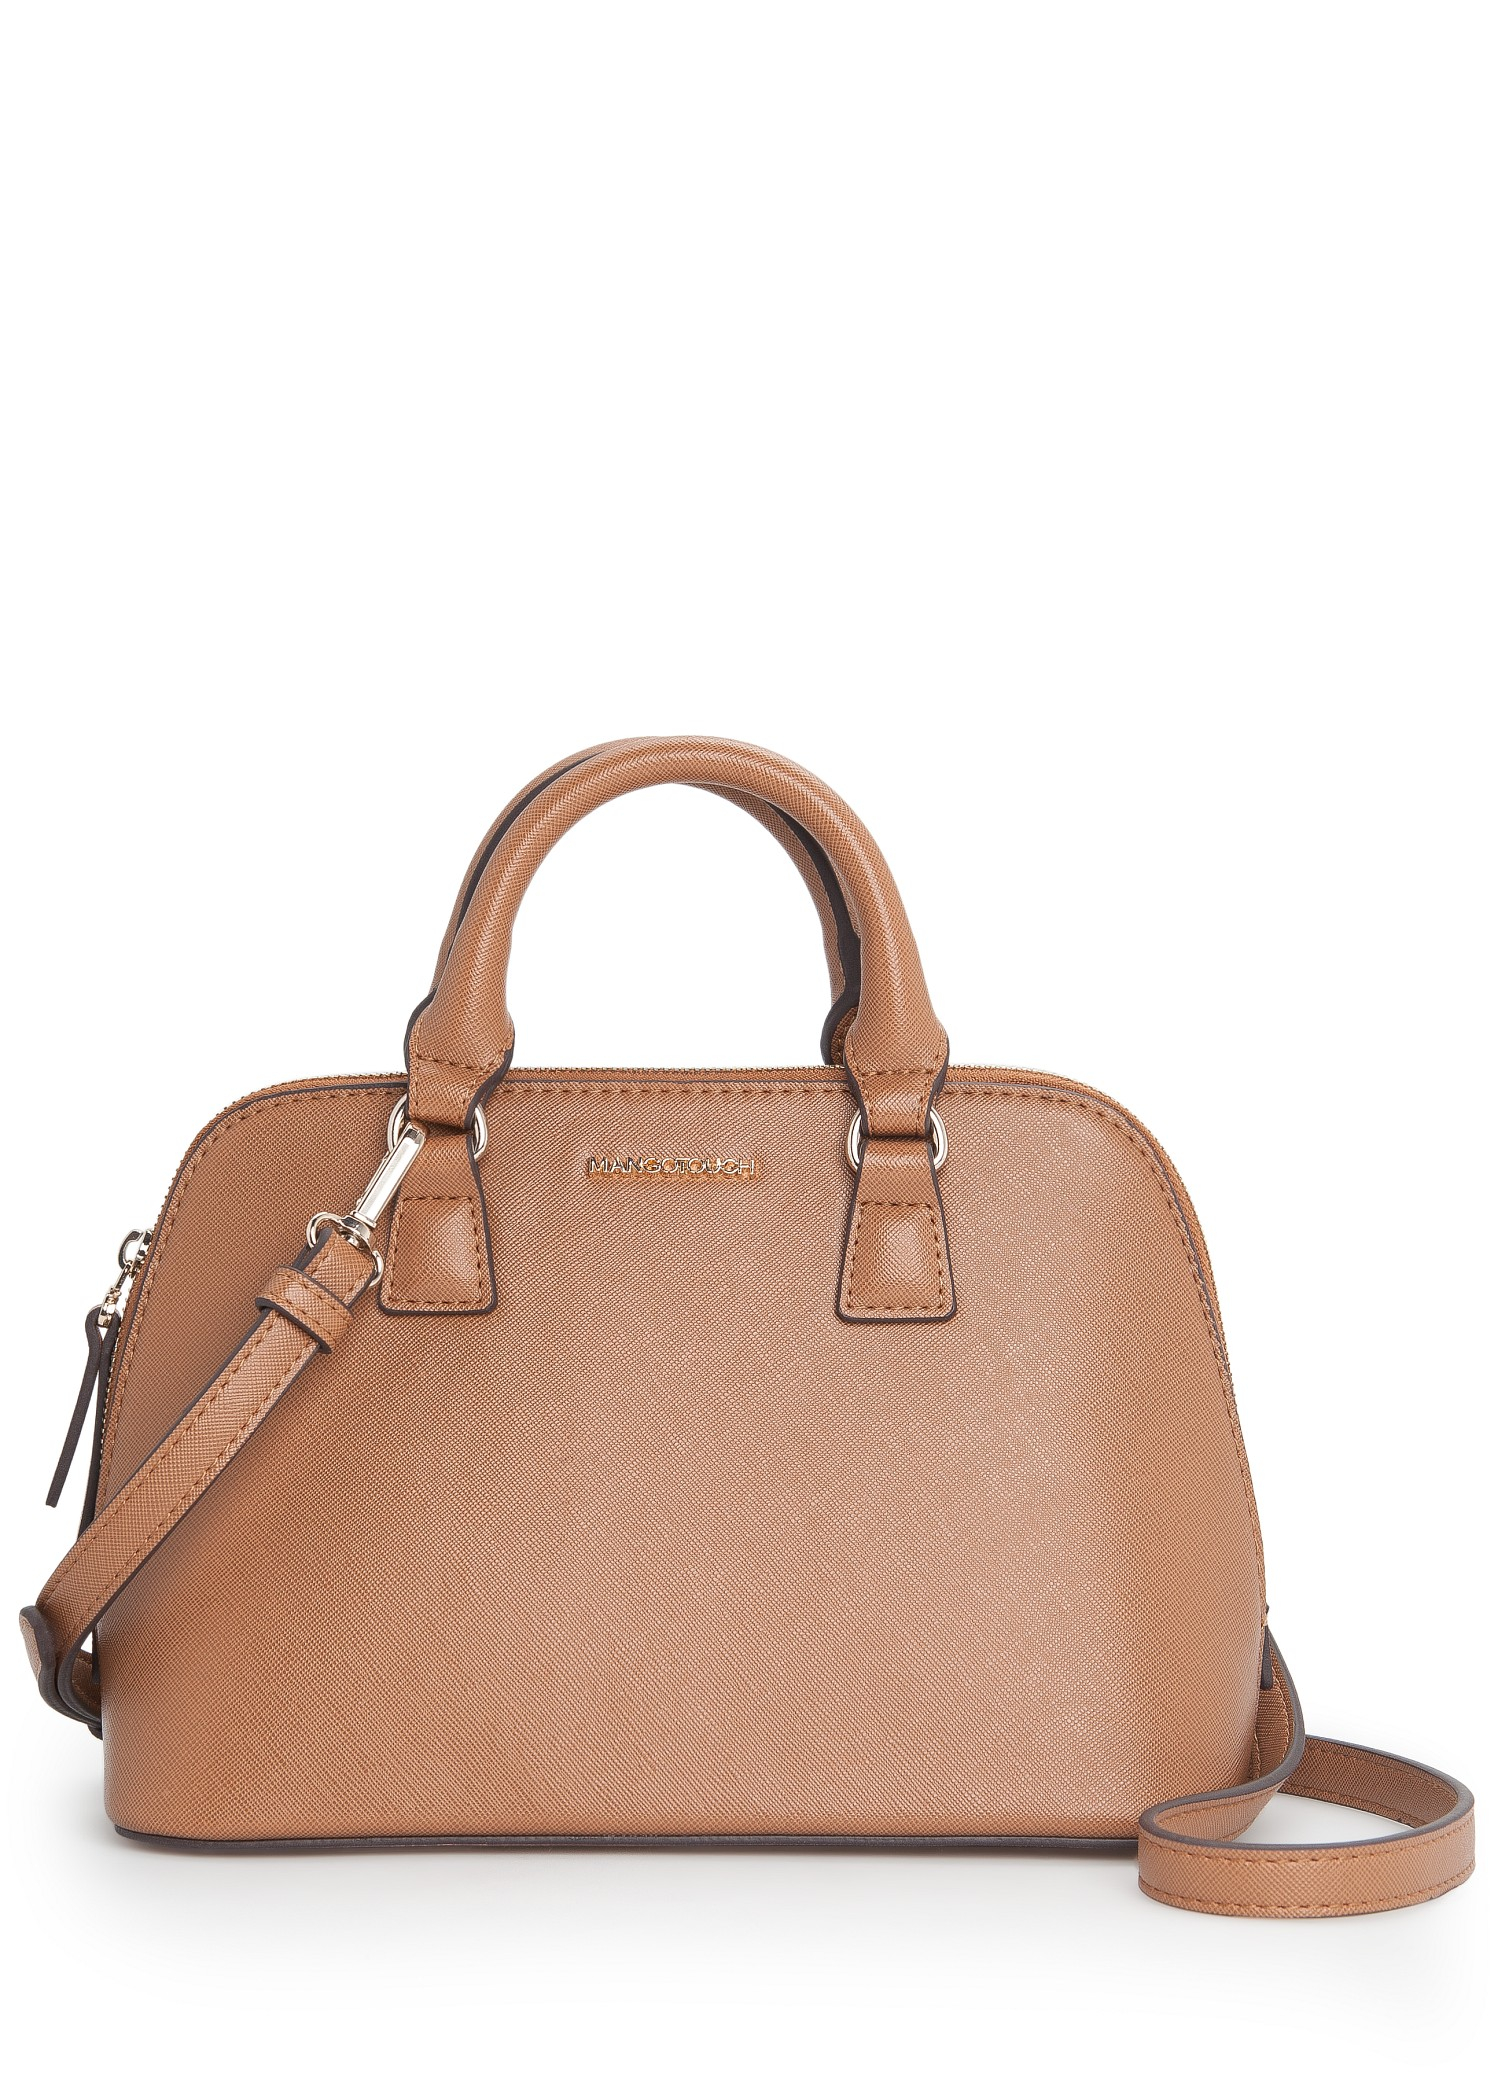 Lyst - Mango Saffianoeffect Tote Bag in Natural